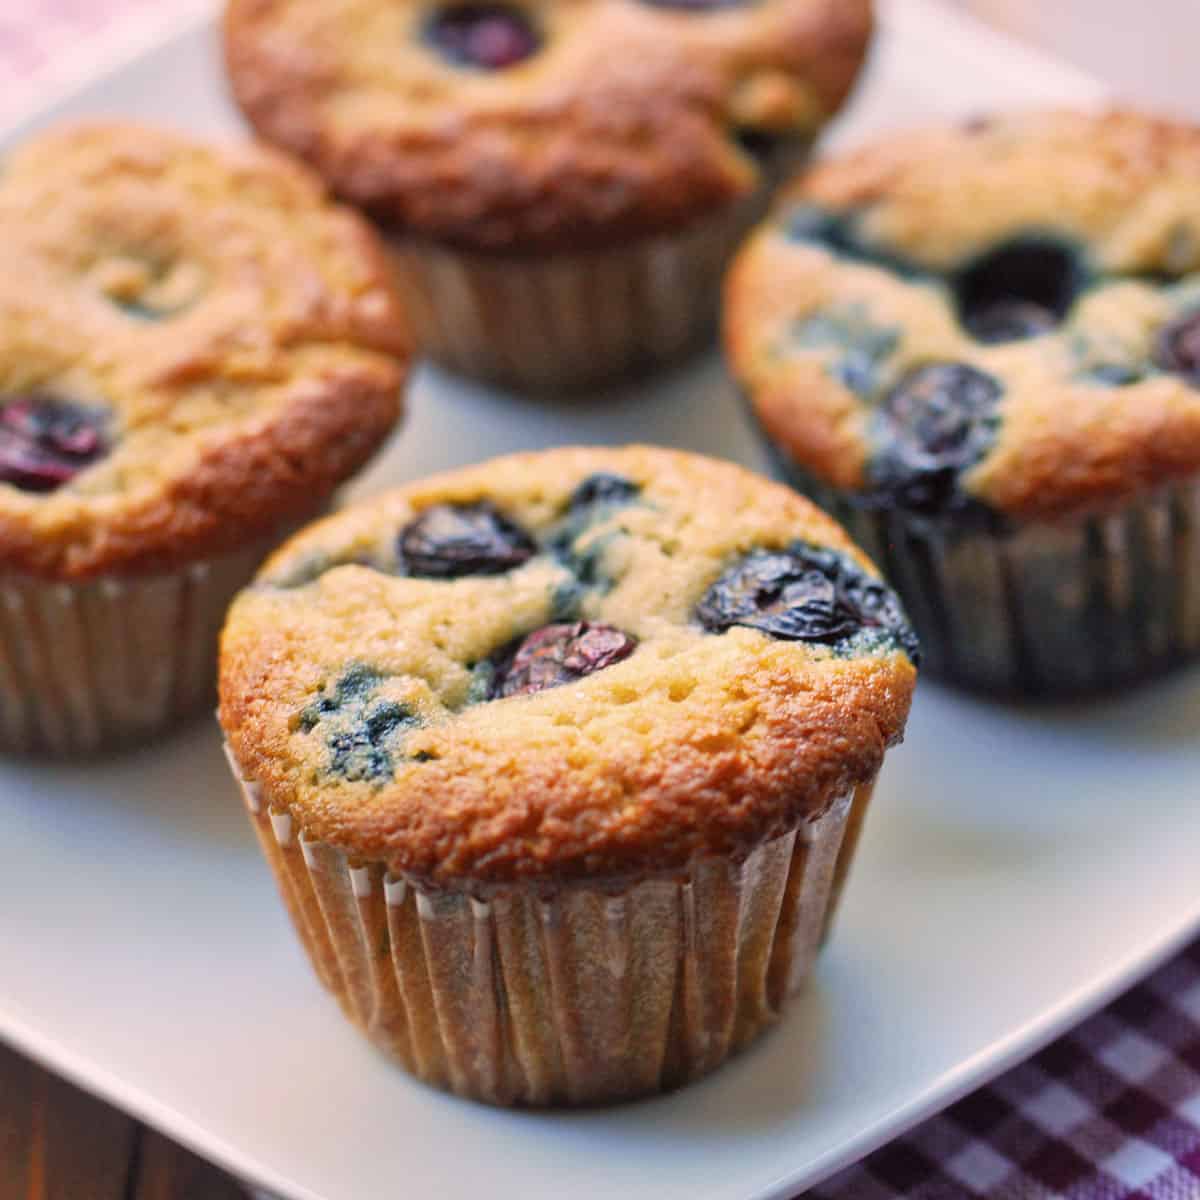 Almond flour muffins with blueberries.